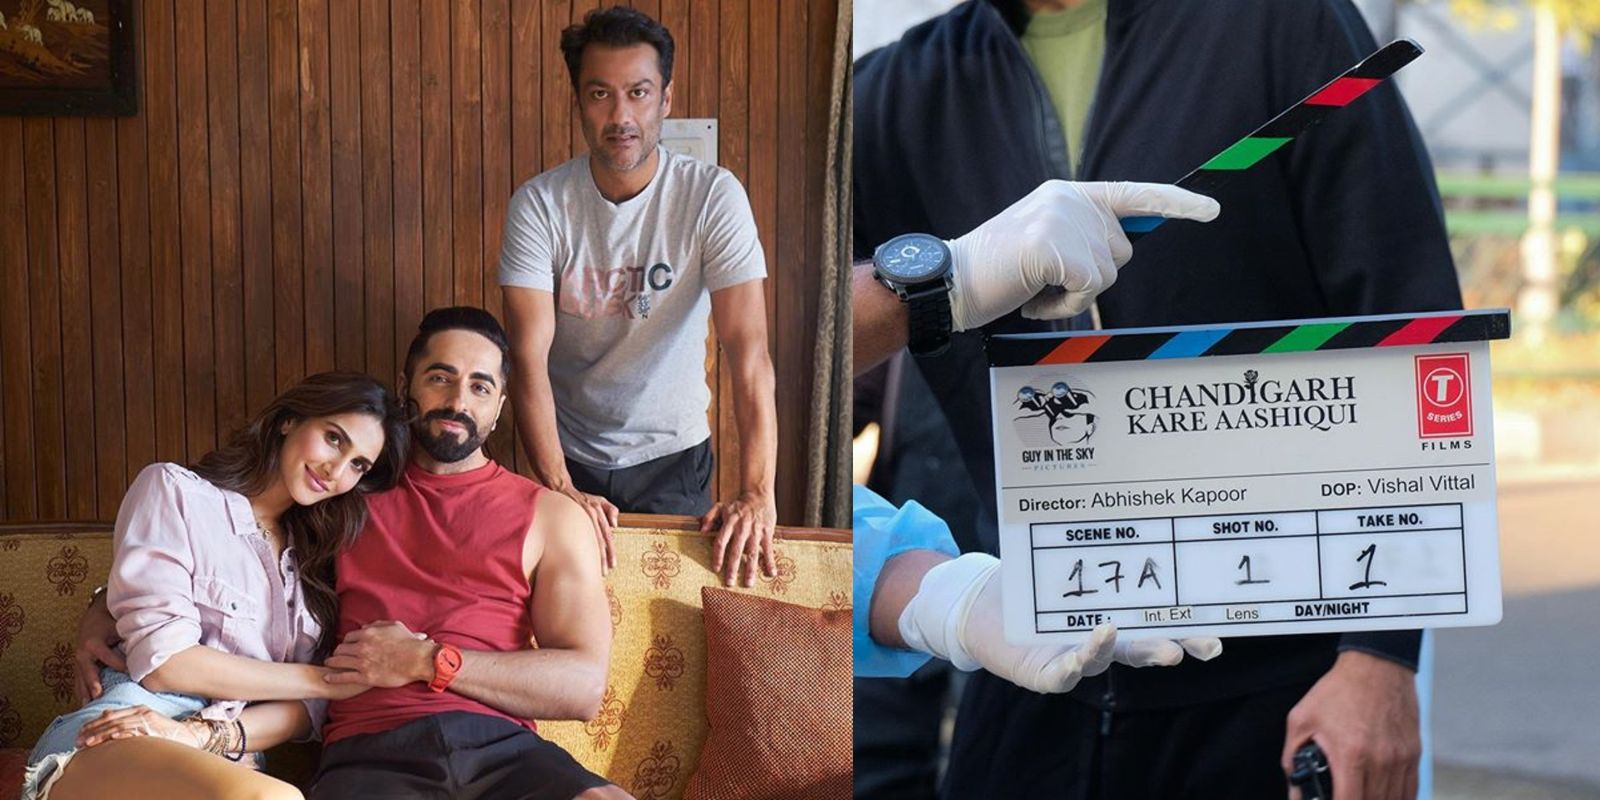 Chandigarh Kare Aashiqui: Abhishek Kapoor's Next With Ayushmann Khurrana As The Cross-Functional Athlete Gets Its Title